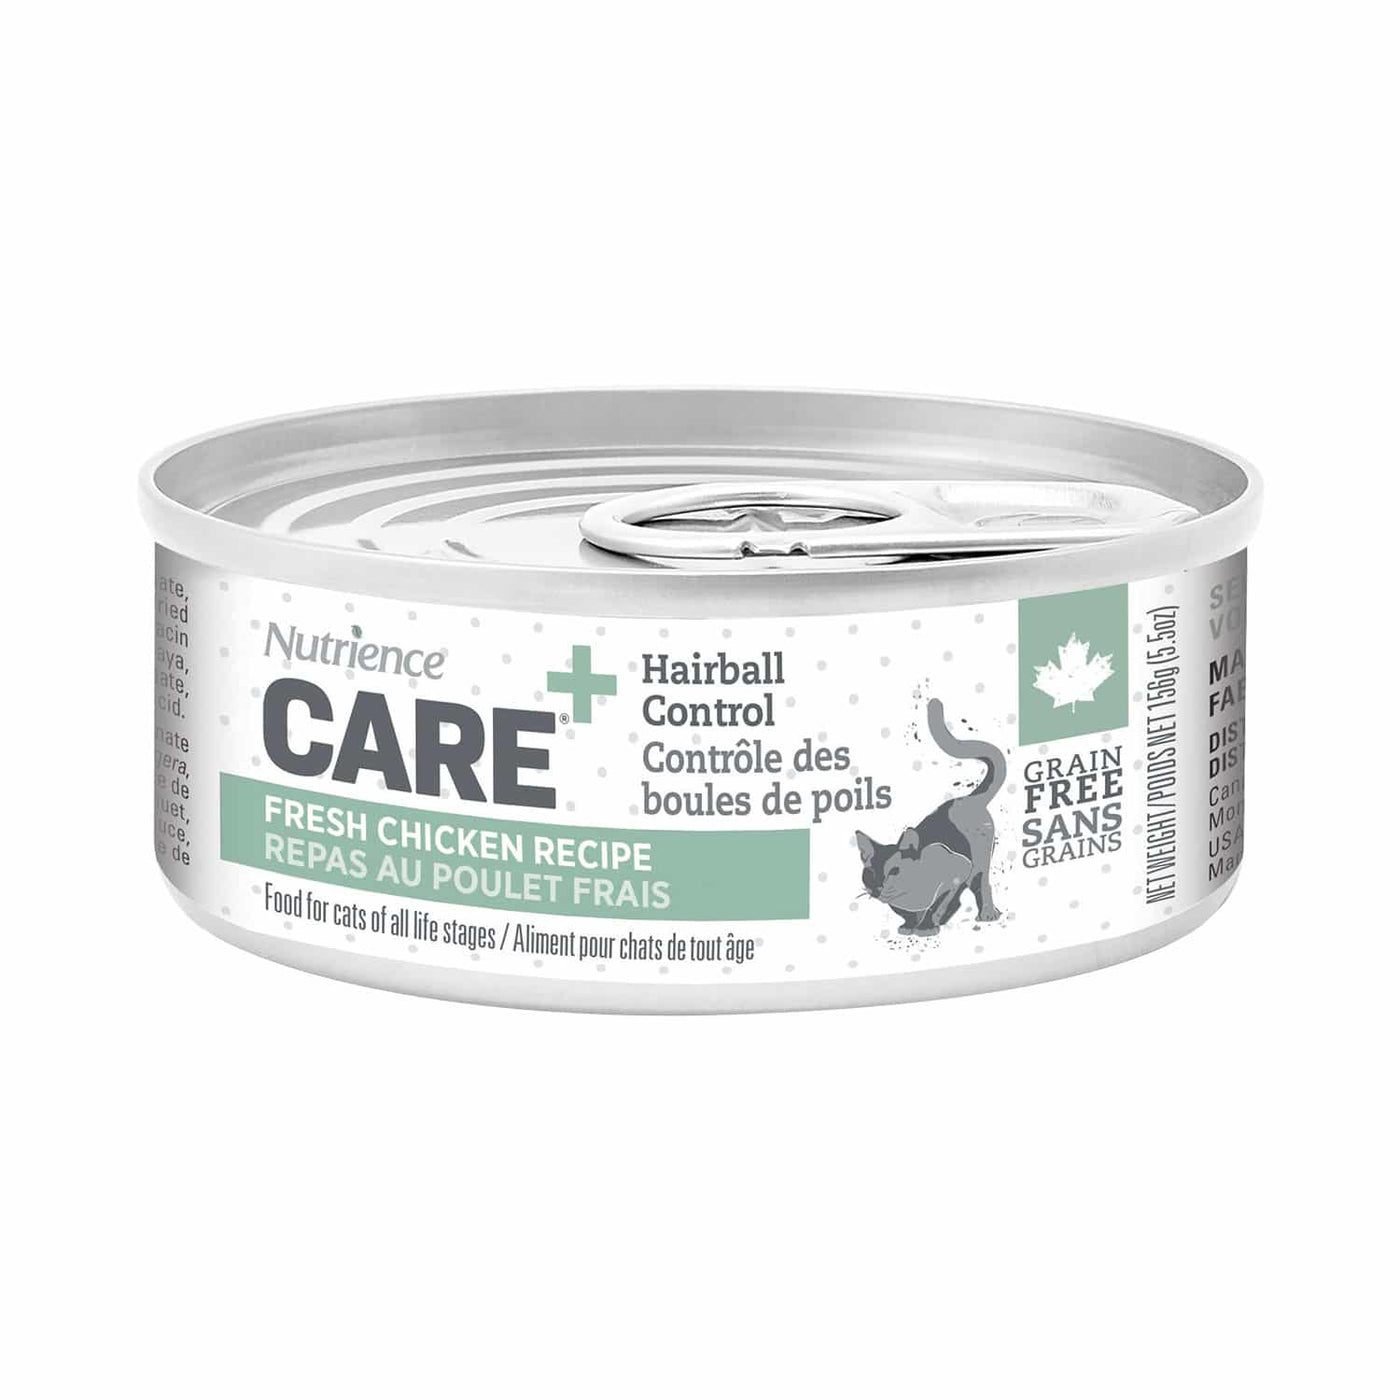 Hairball Control - Wet Cat Food - Nutrience